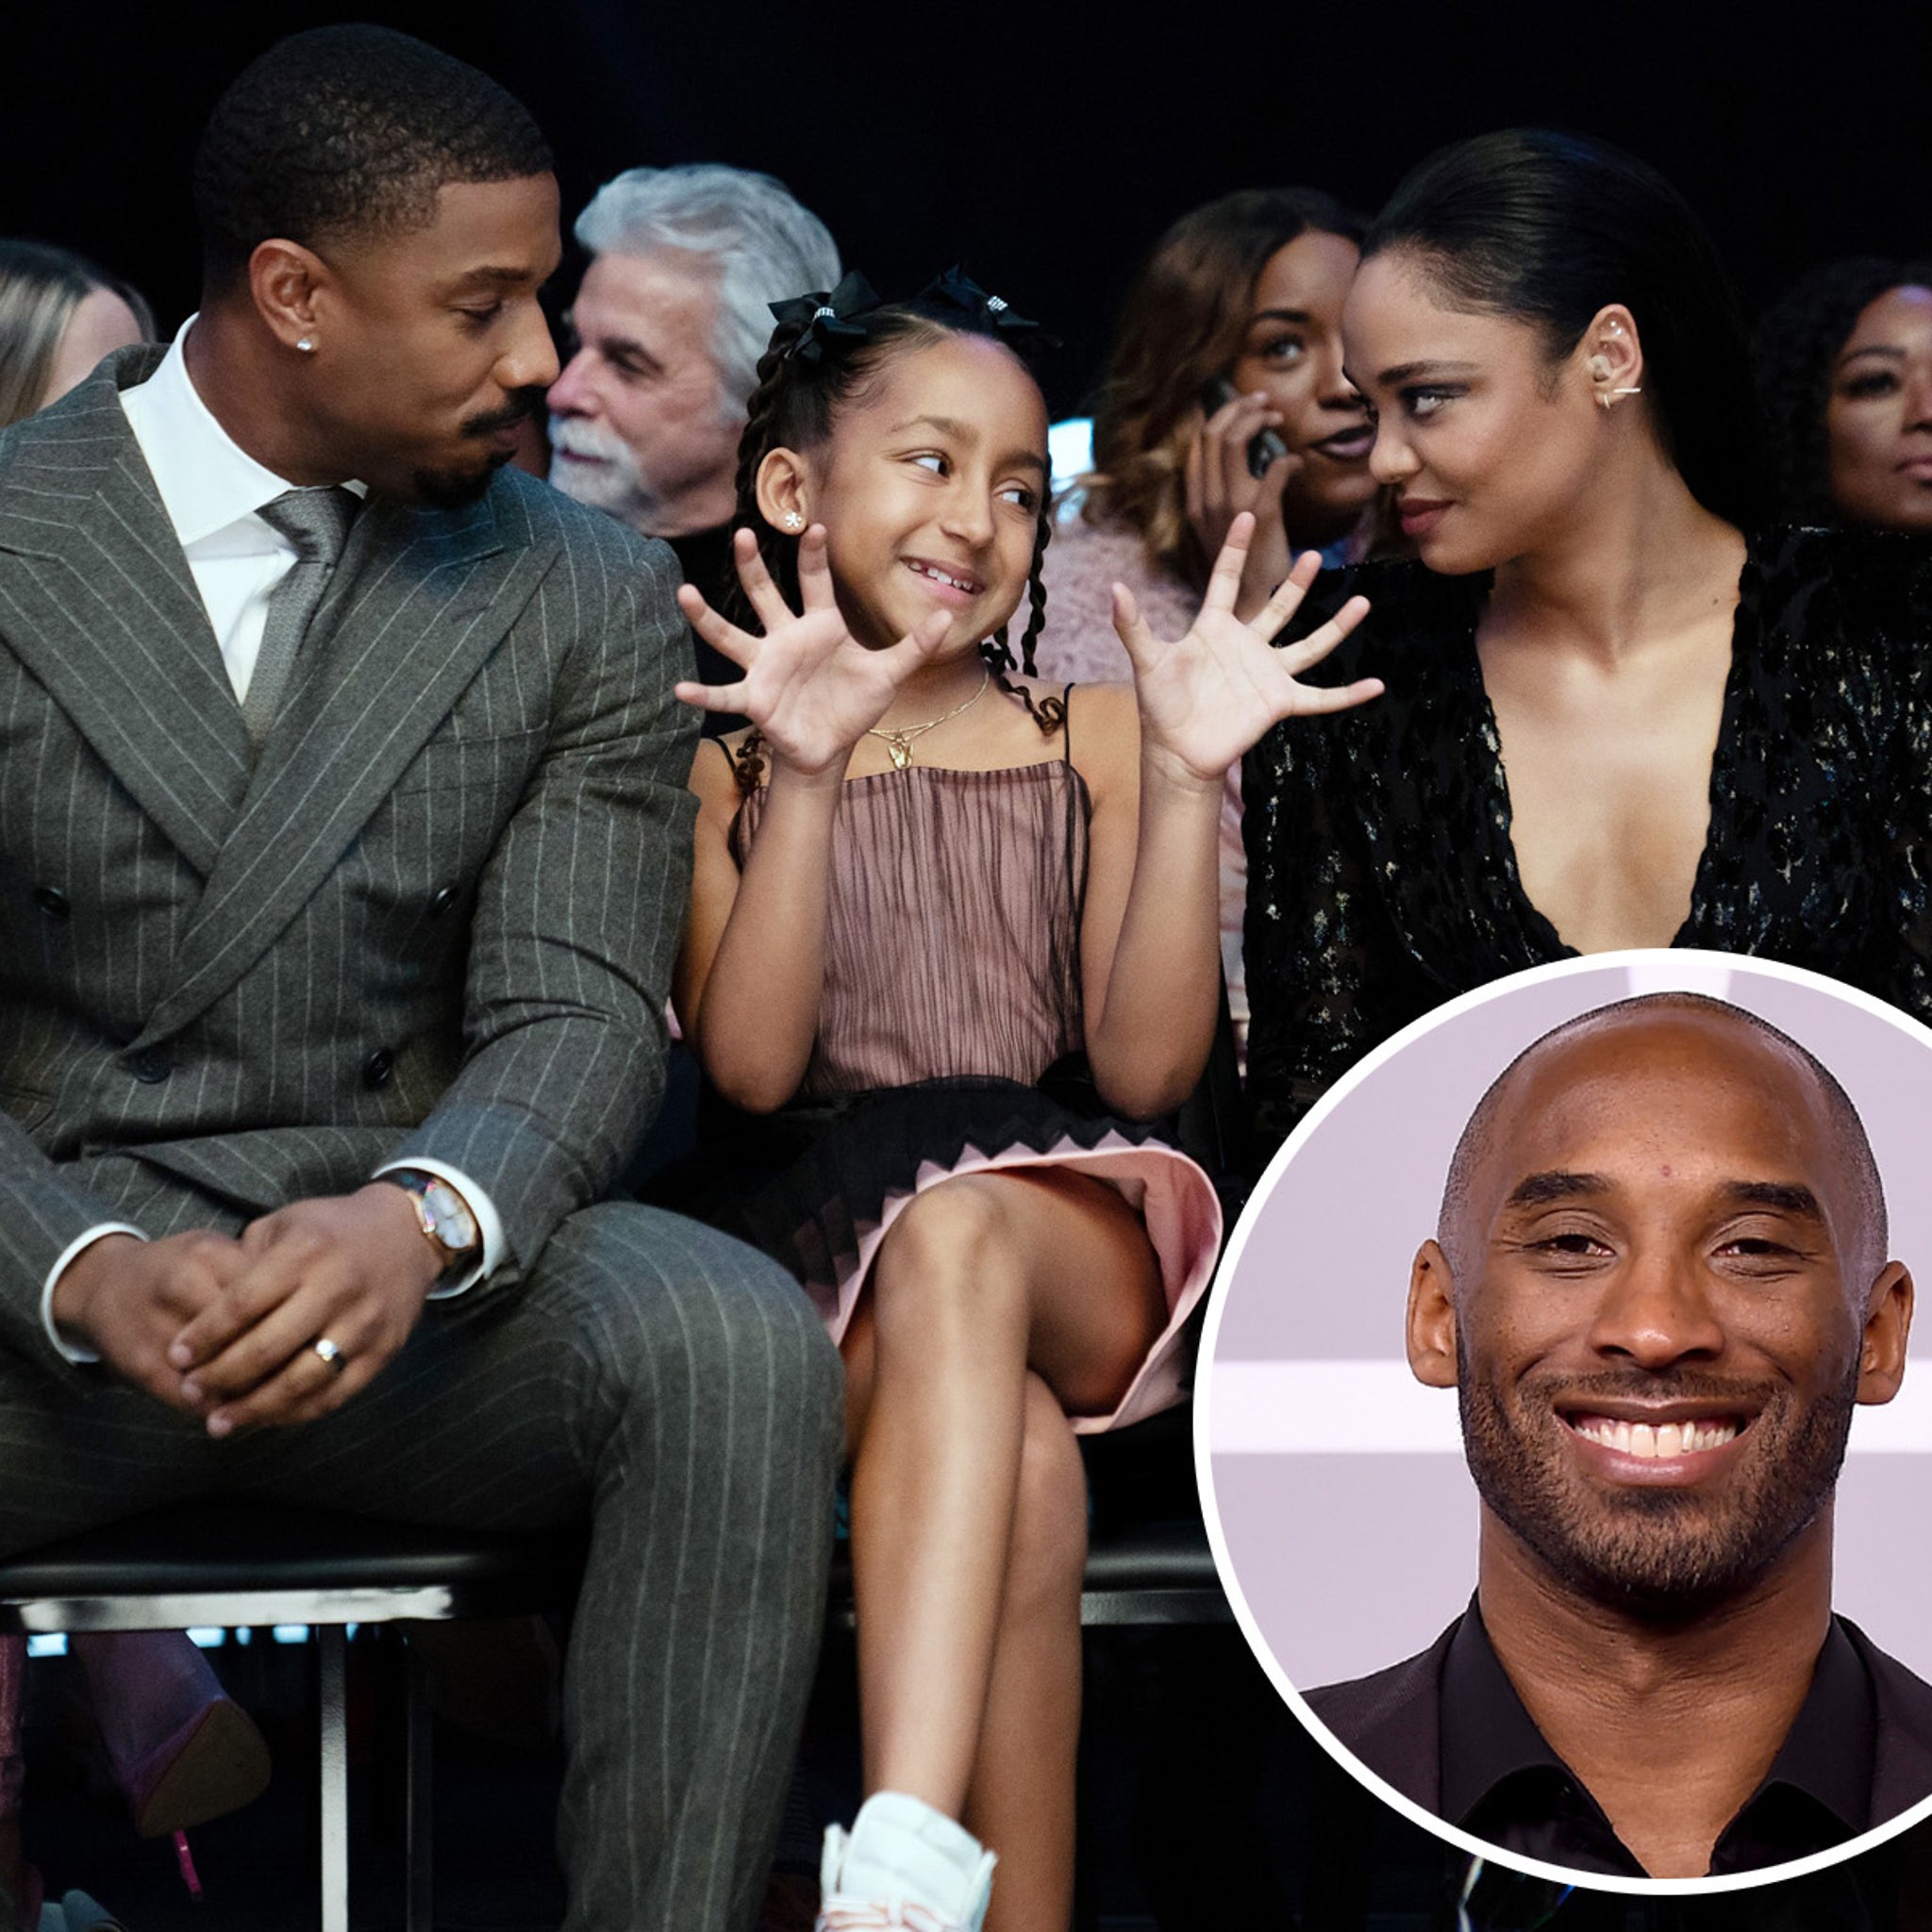 Michael B. Jordan On How Kobe Bryant & Daughter Gianna Inspired Creed III  Role as a Dad